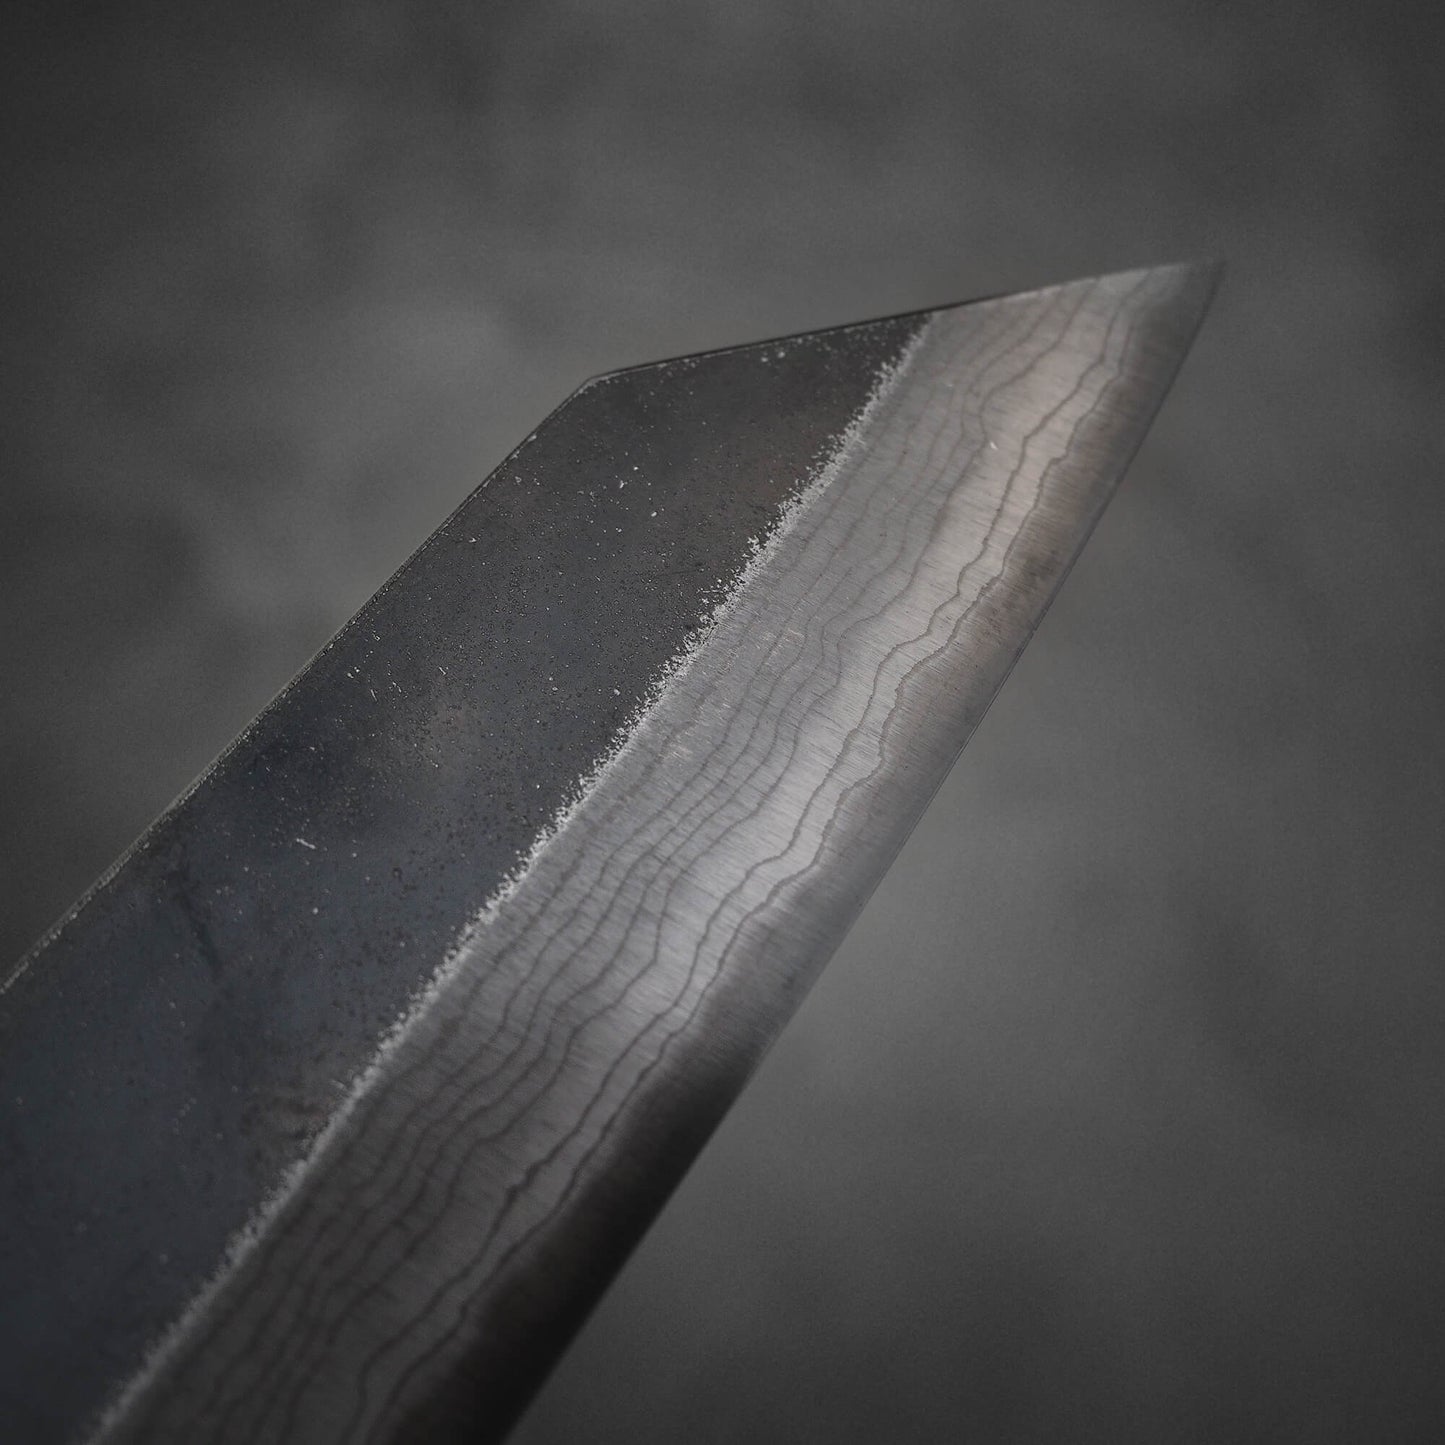 Close up view of Hatsukokoro Kumokage kurouchi damascus aogami#2 bunka knife. Image shows the tip area of the right side of the blade.